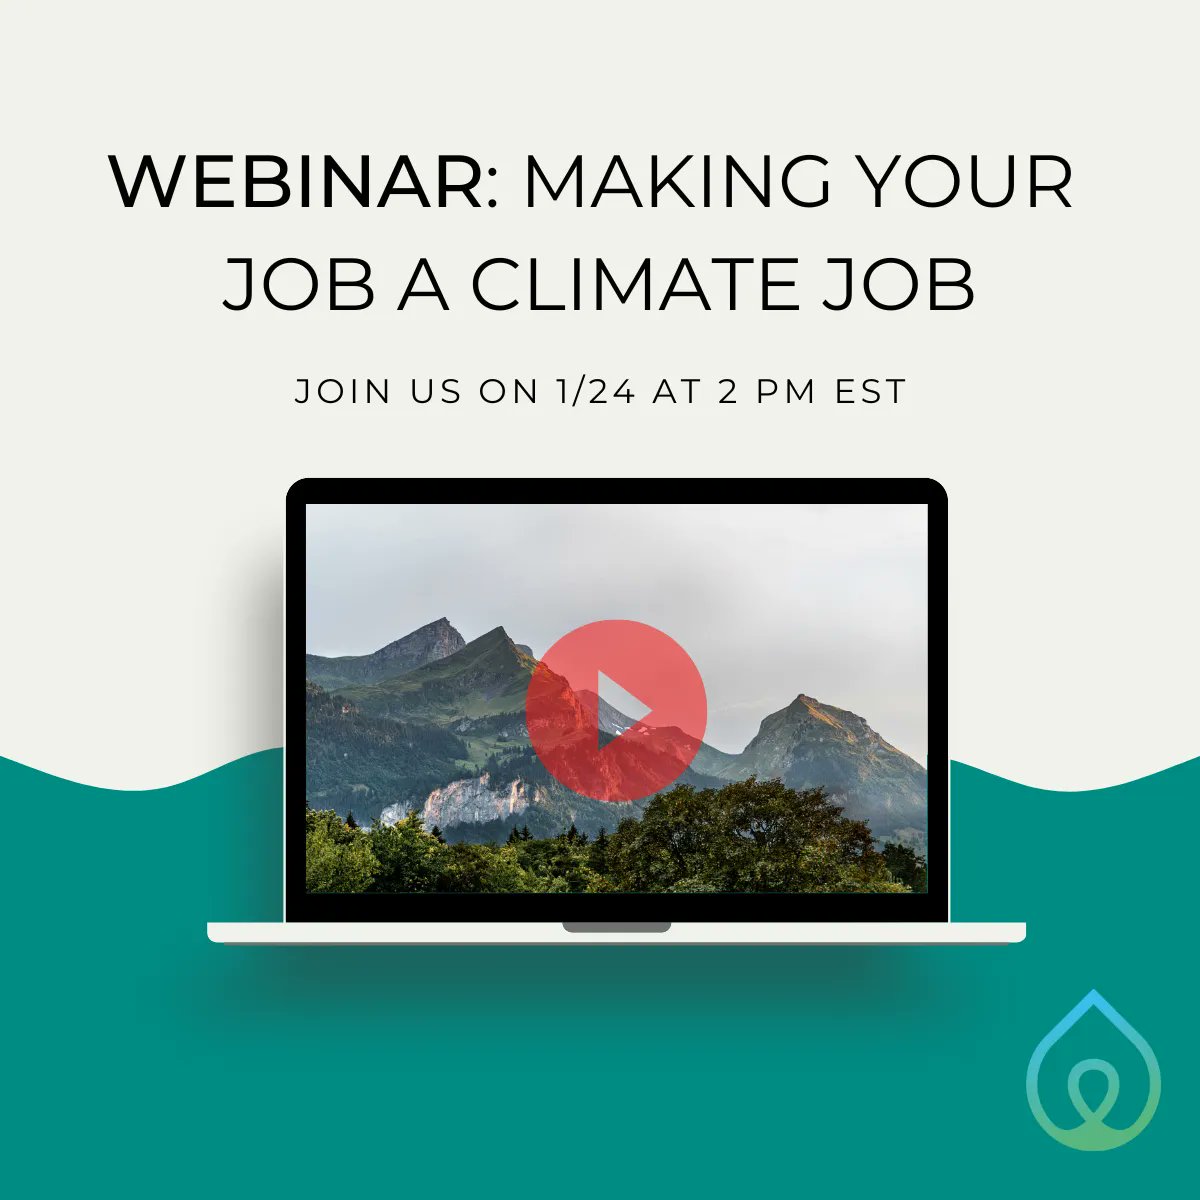 Wondering how you can make your job a #climatejob? Join us next Tuesday, the 24th, at 2 PM EST for a webinar with panelists from @ProjectDrawdown, @ClimateClub_, @LinkedIn, and @BrownGirl_Green!

Register here: bit.ly/makeyourjobacl…